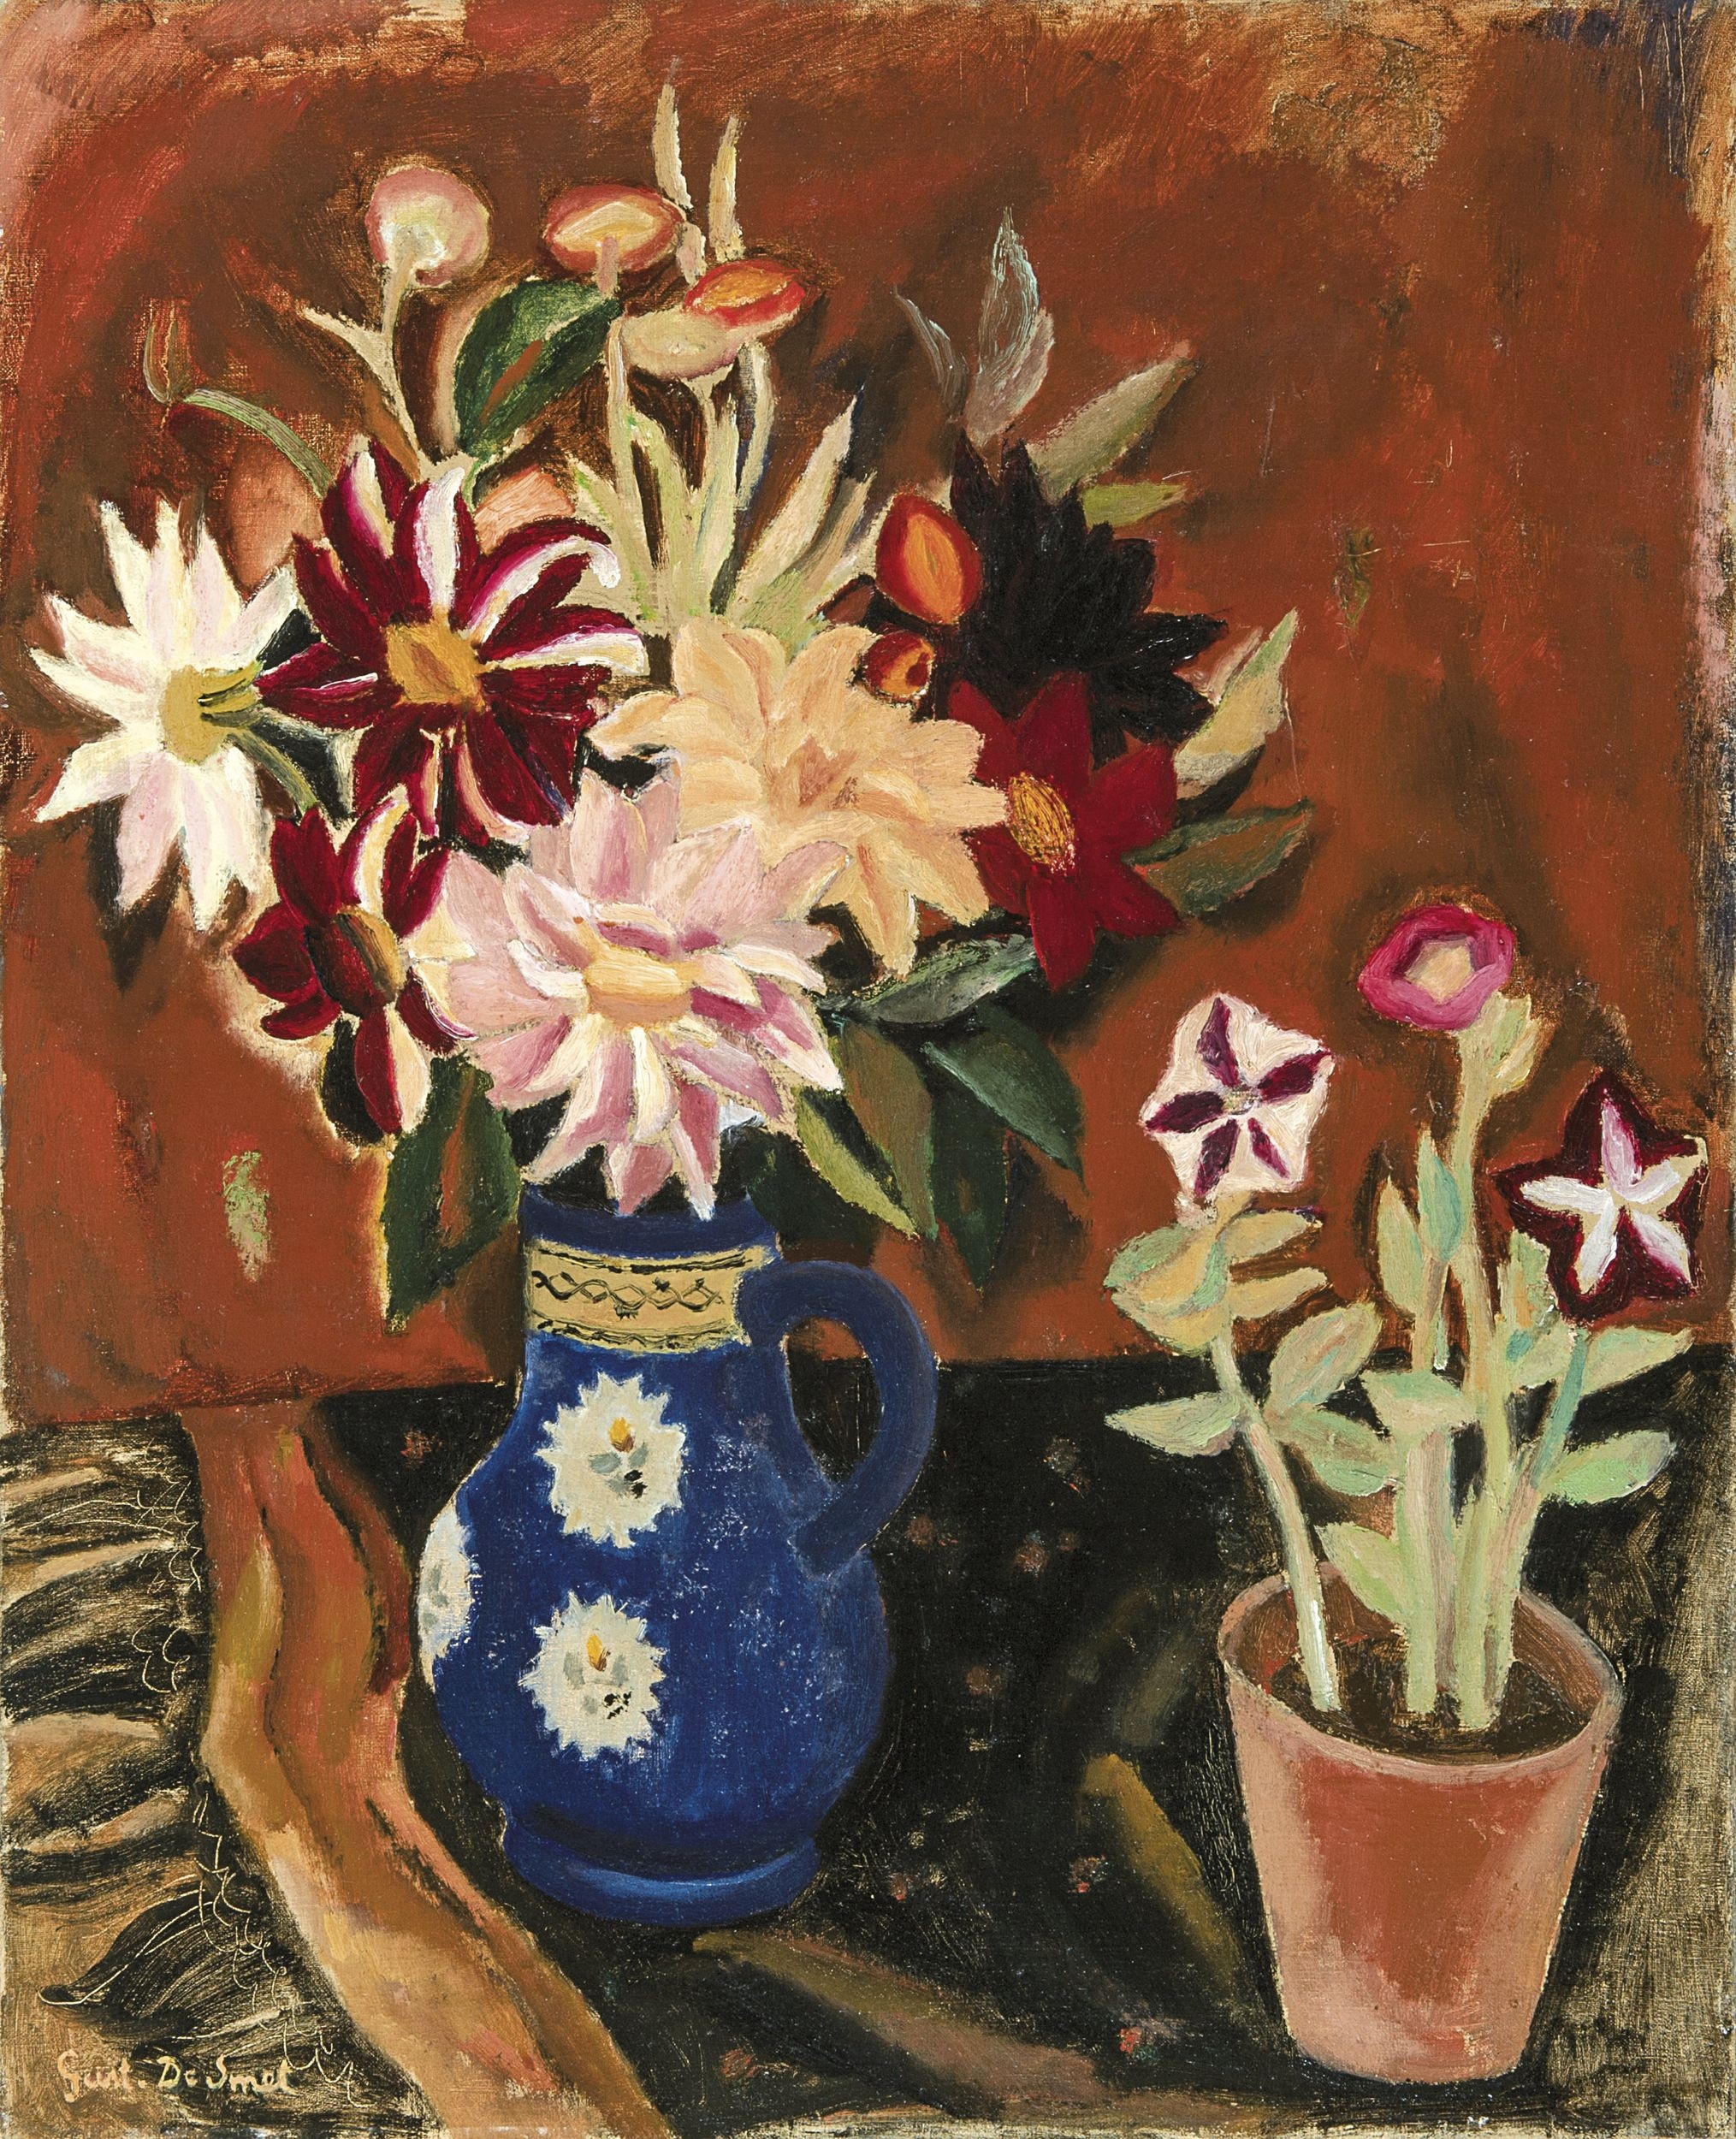 Blue Vase with Flowers by Gustave de Smet, circa 1930